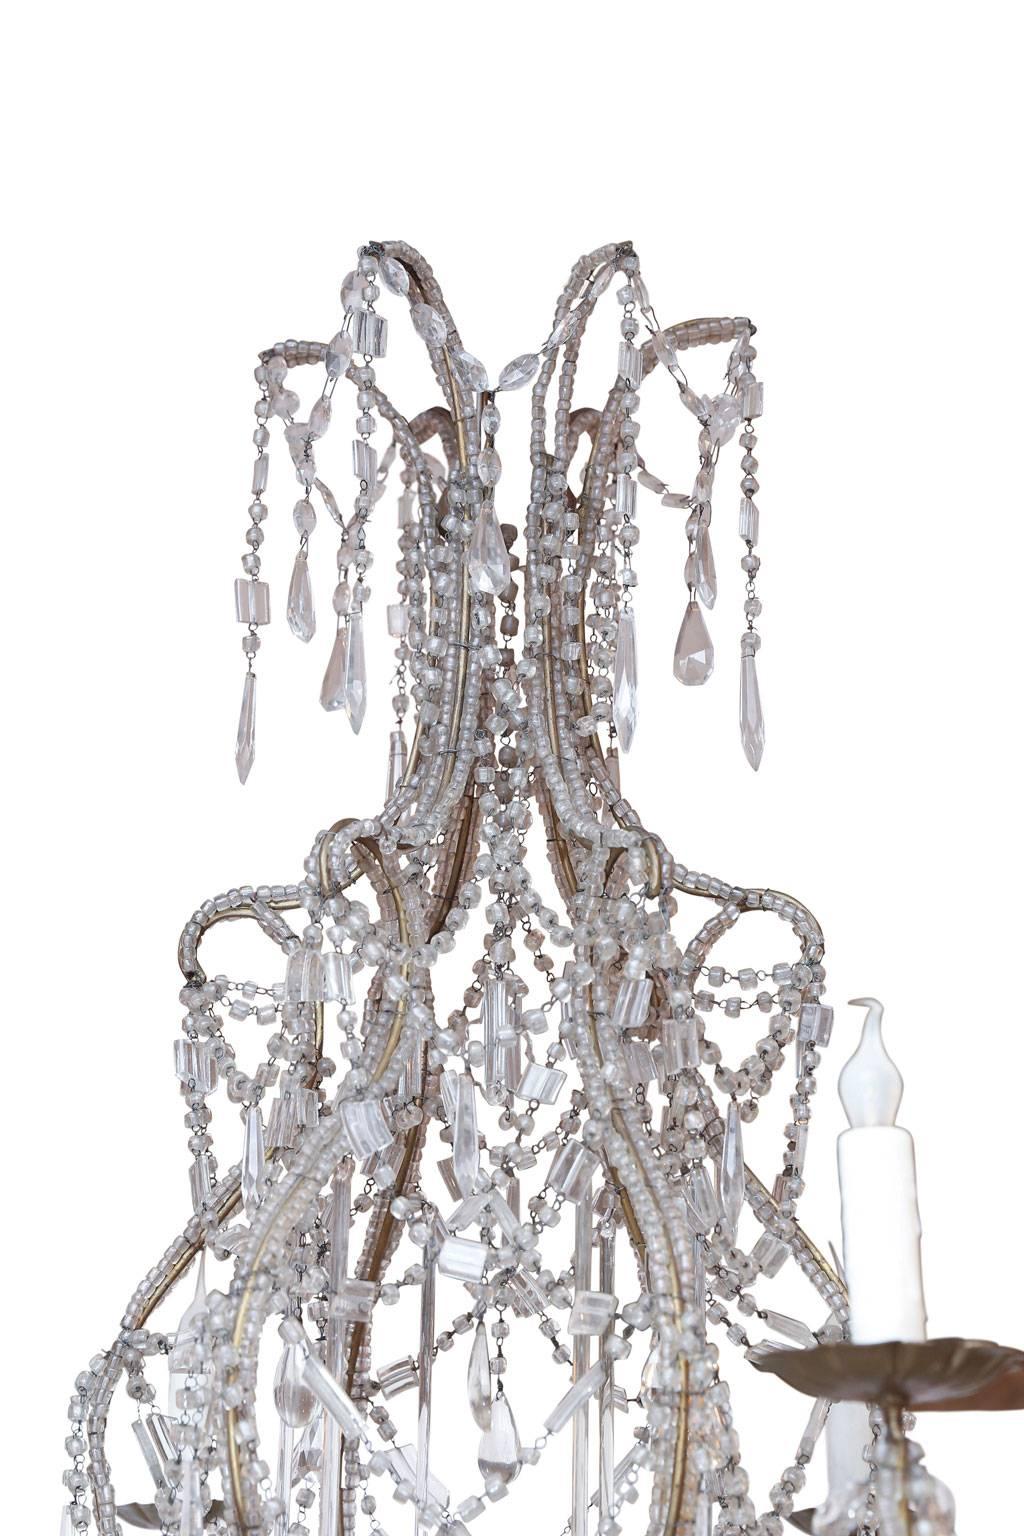 Italian crystal and beaded chandelier, beaded gilt-iron frame with six arms decorated in crystal and glass pendants and prisms. Dated to the early 20th century, now newly-wired for use within the USA using all UL approved parts. Includes chain and